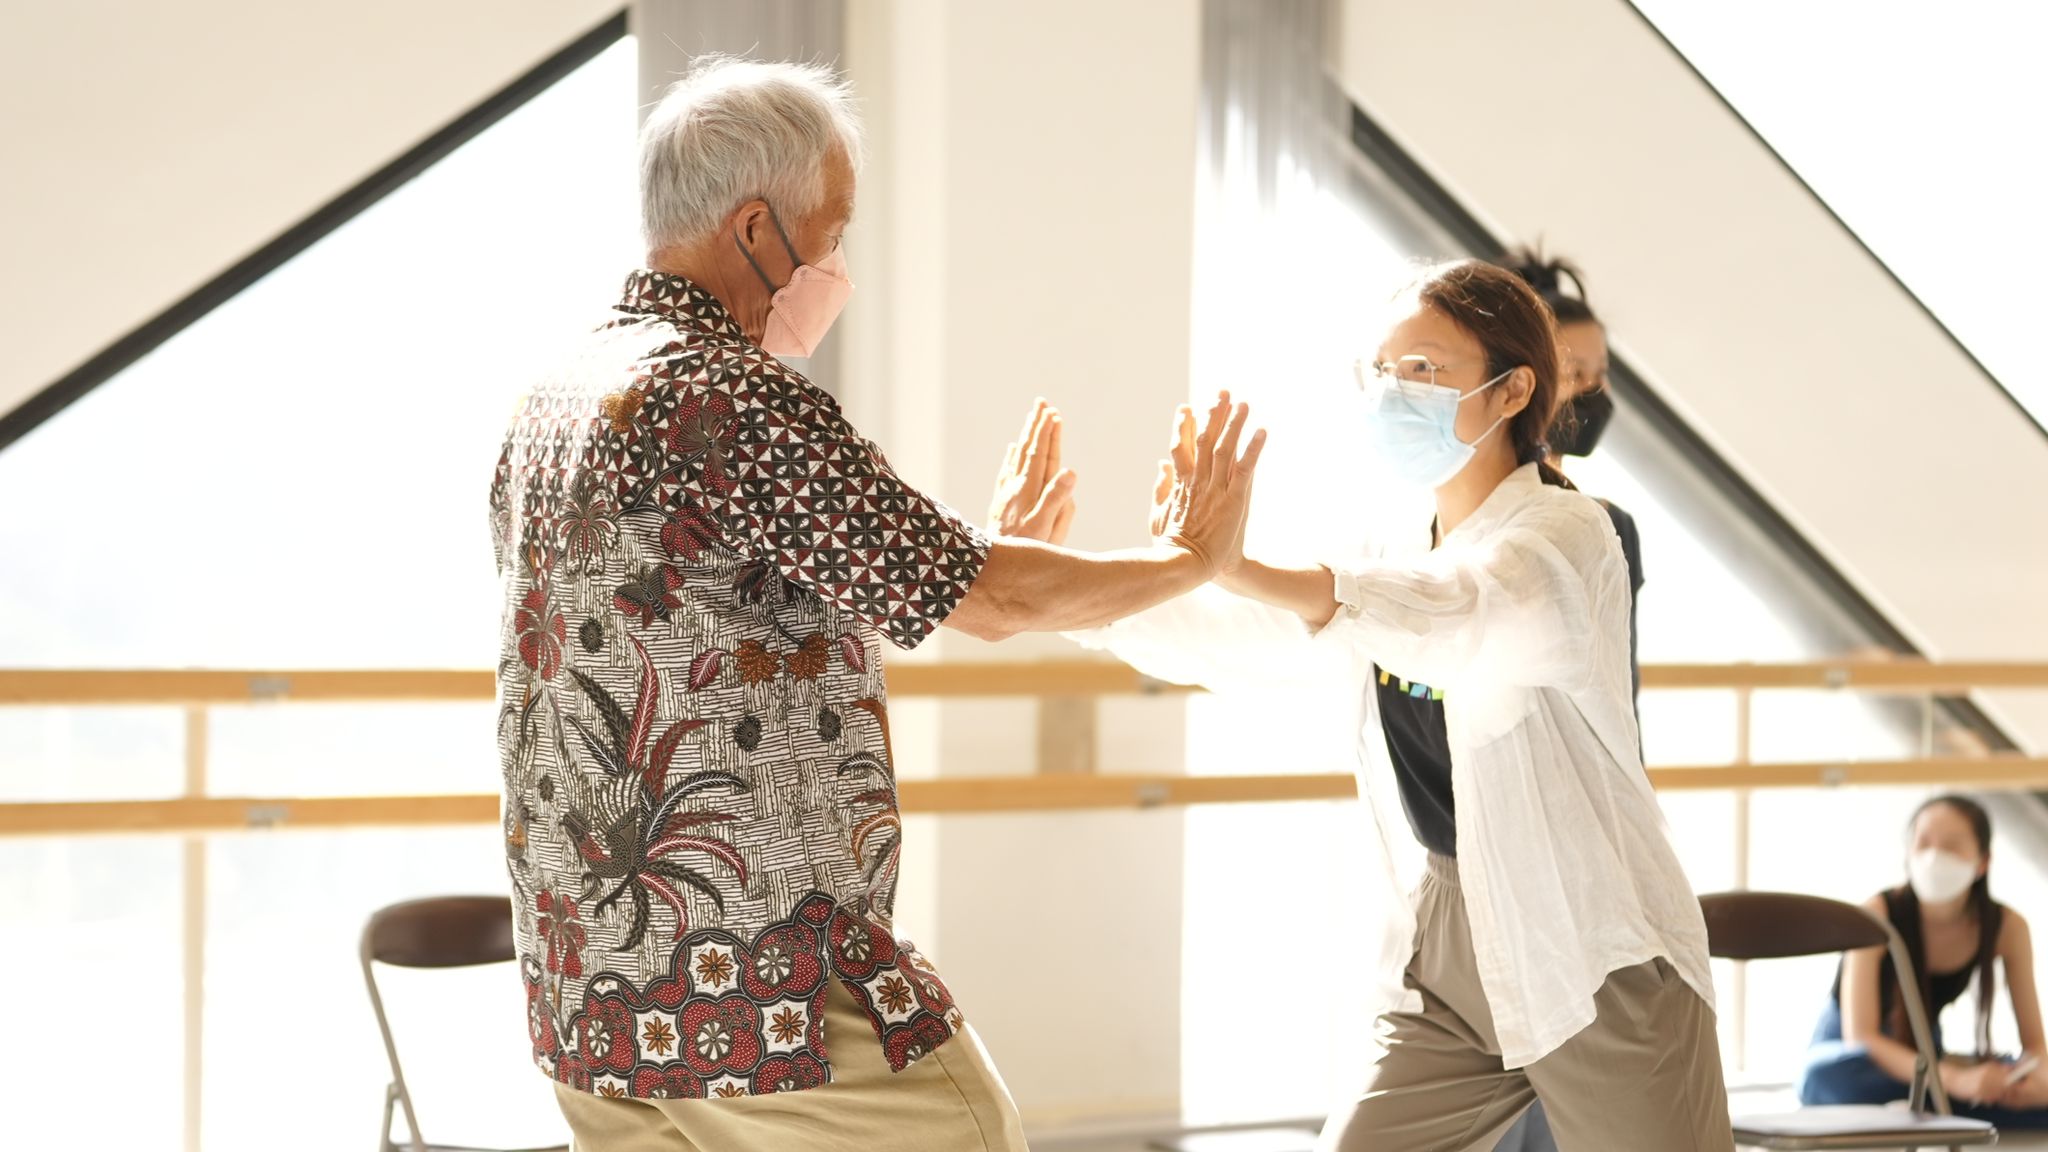 Dance Well classes open up interpersonal relationships in combating the isolation that often accompanies Parkinson's disease.  